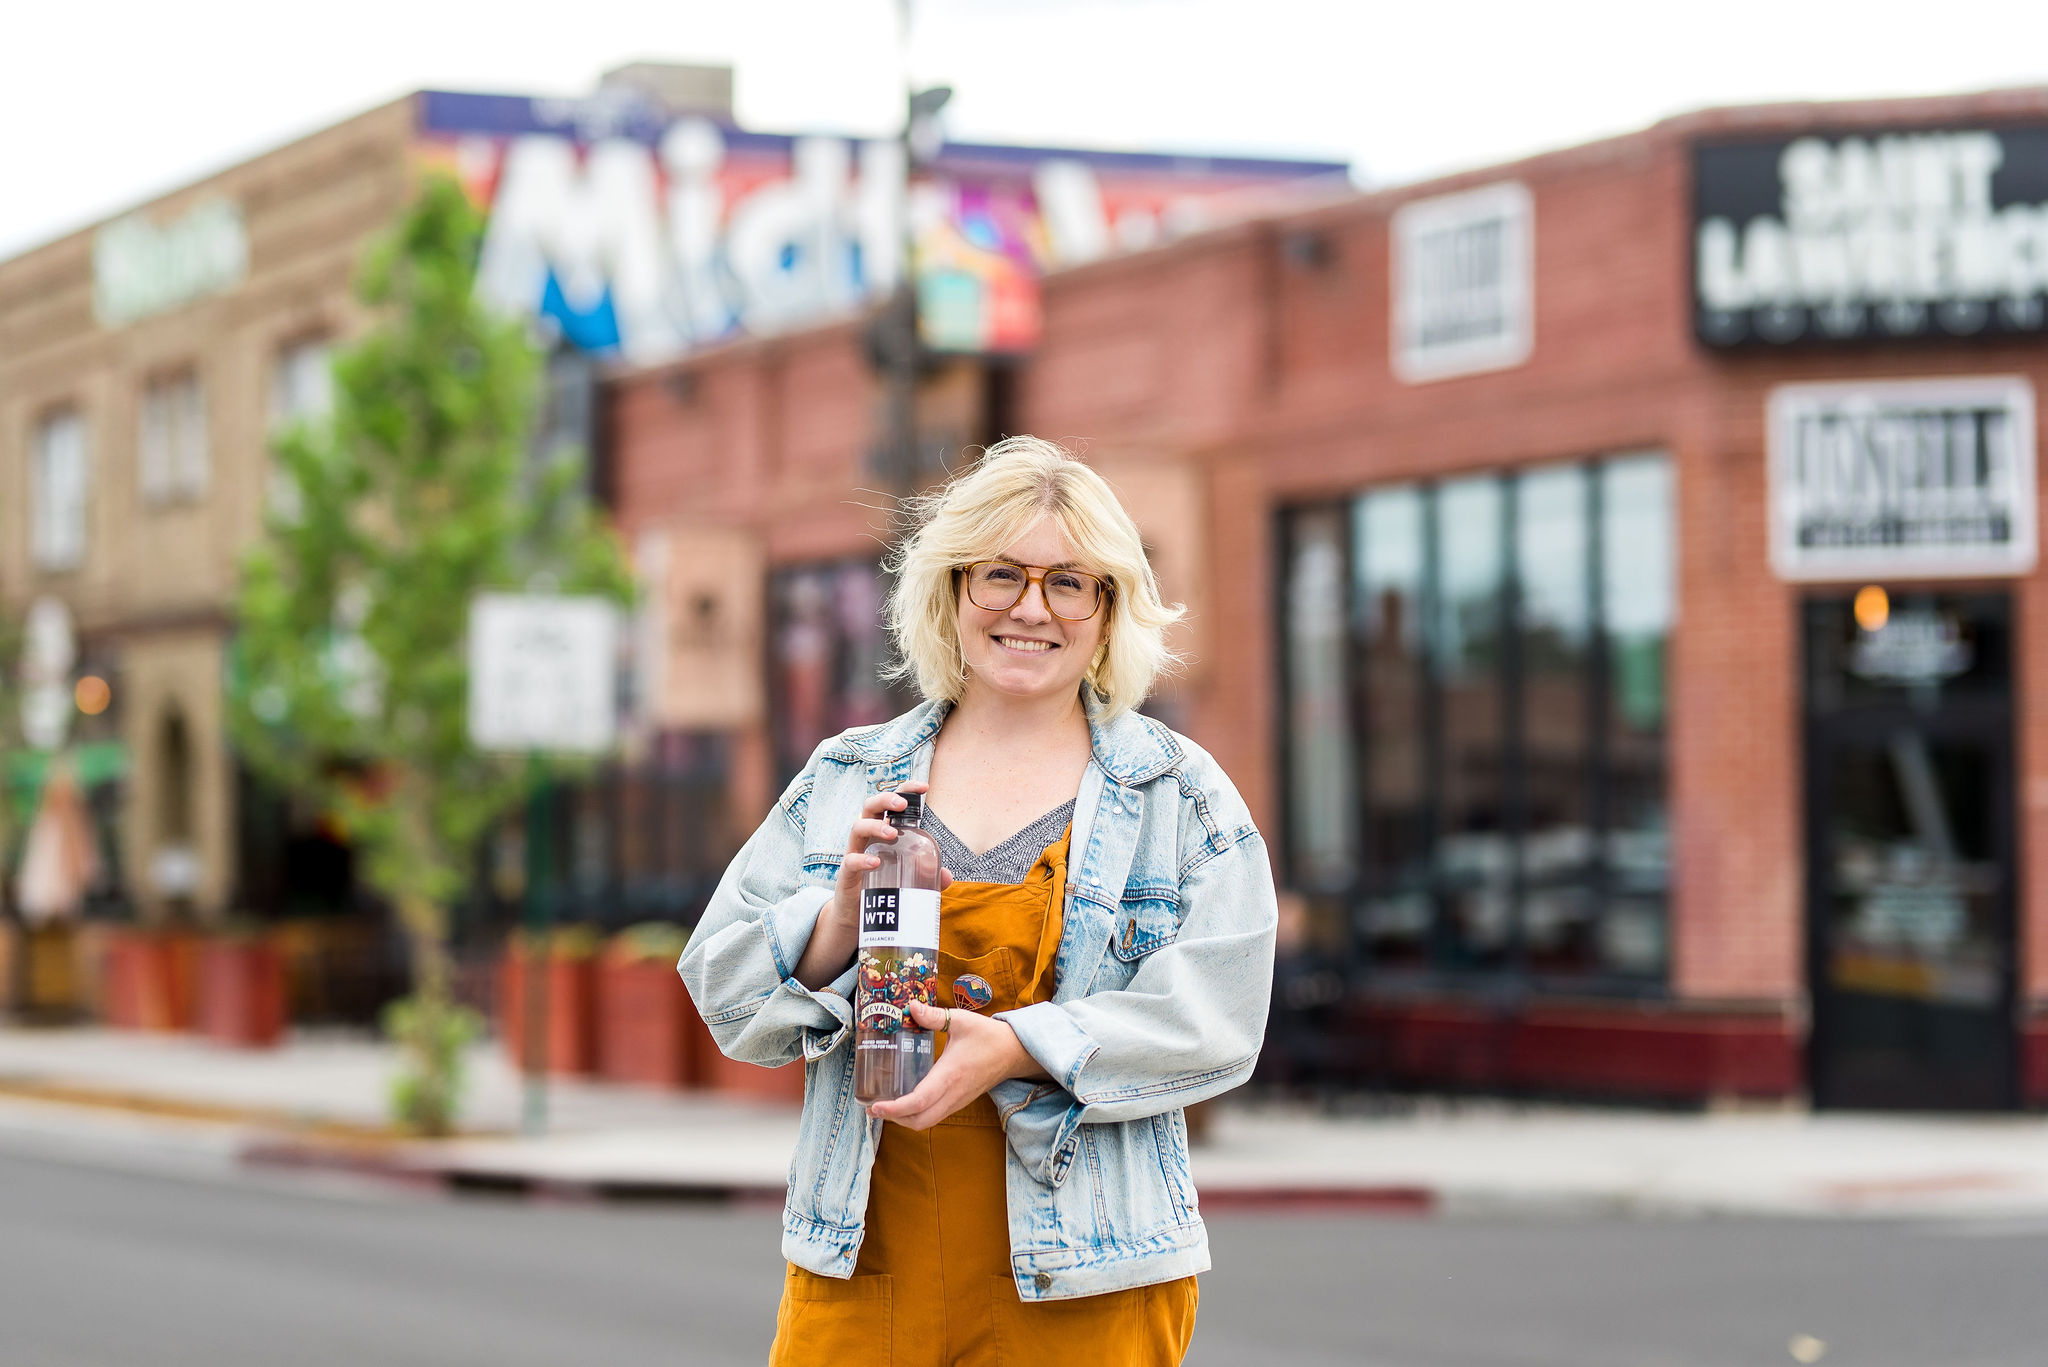 Reno Lifestyle product and headshot photography of Lifewater and the University of Reno